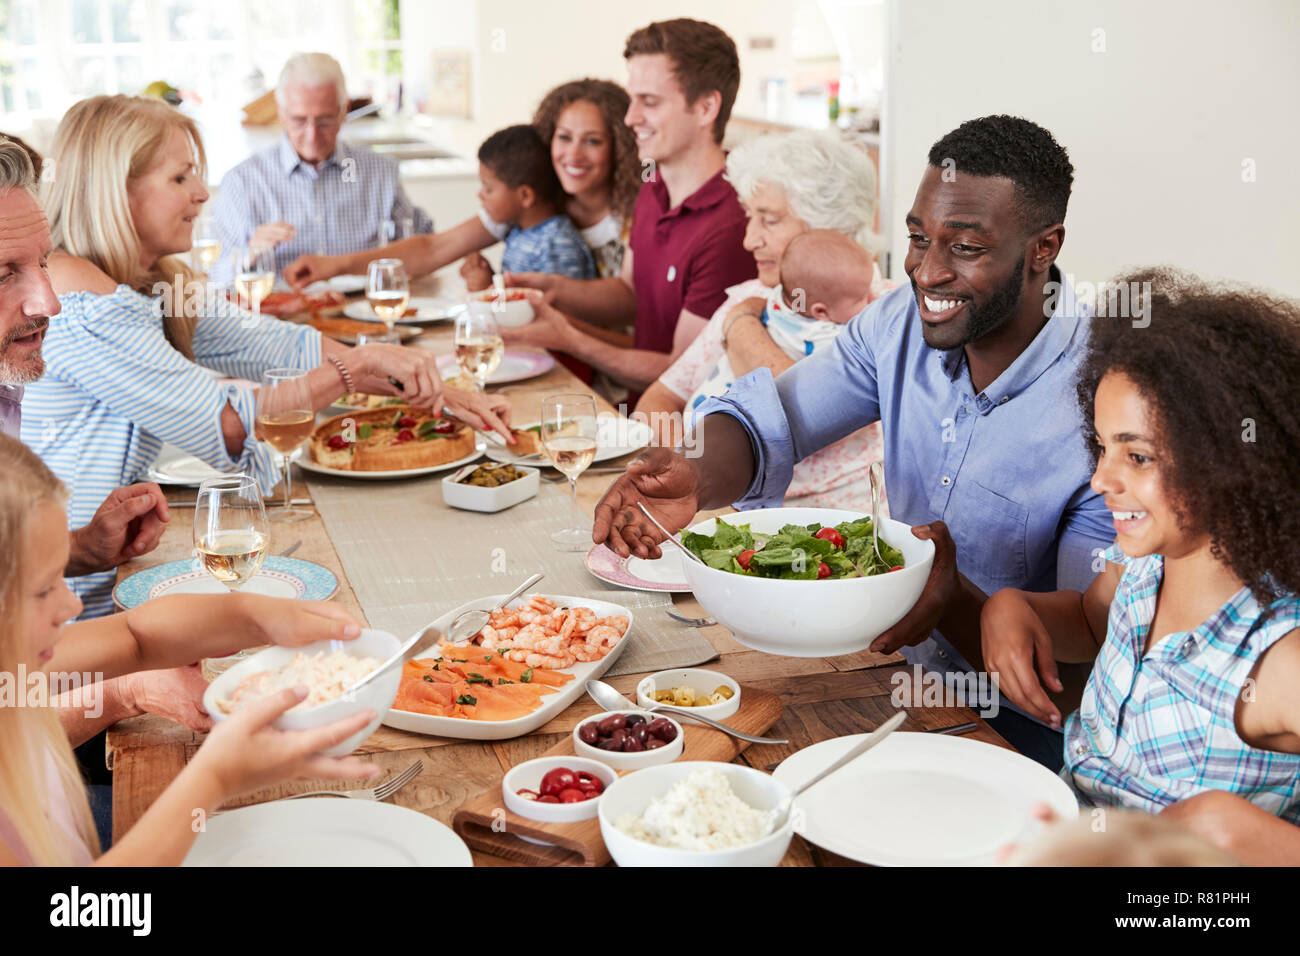 Group Of Multi-Generation Family And Friends Sitting Around Table And Enjoying Meal Stock Photo